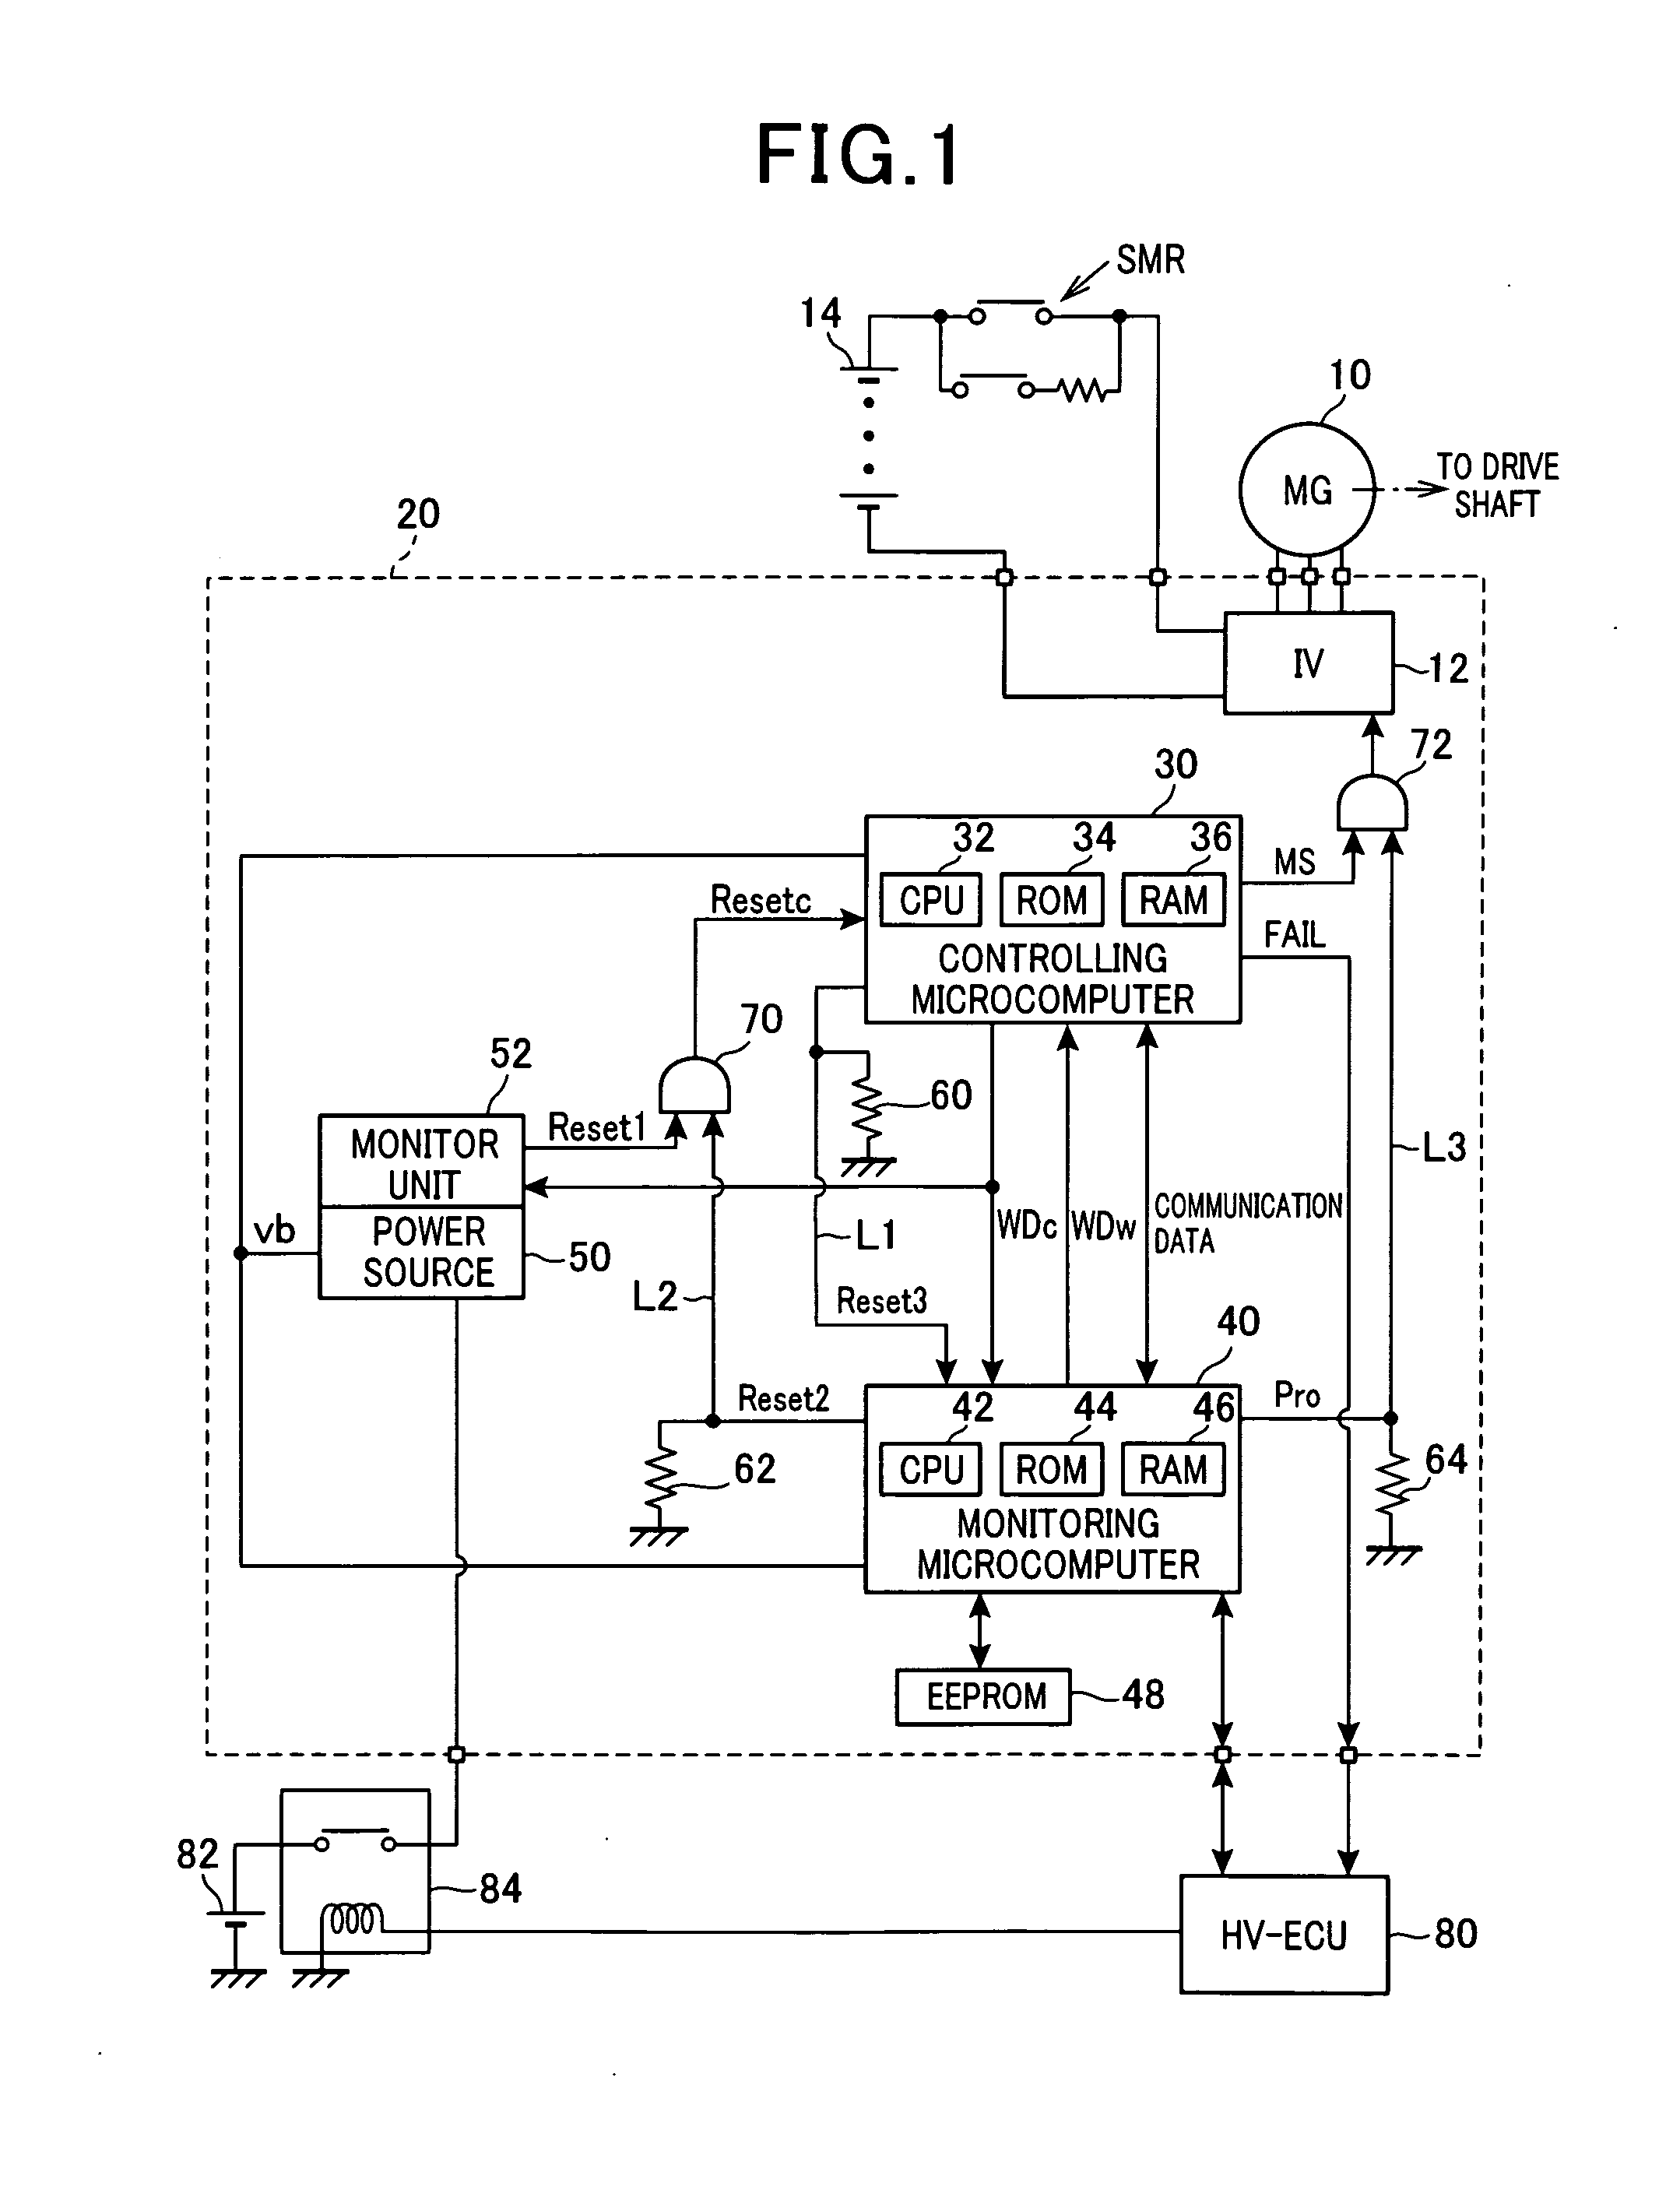 Electronic control apparatus for a vehicle